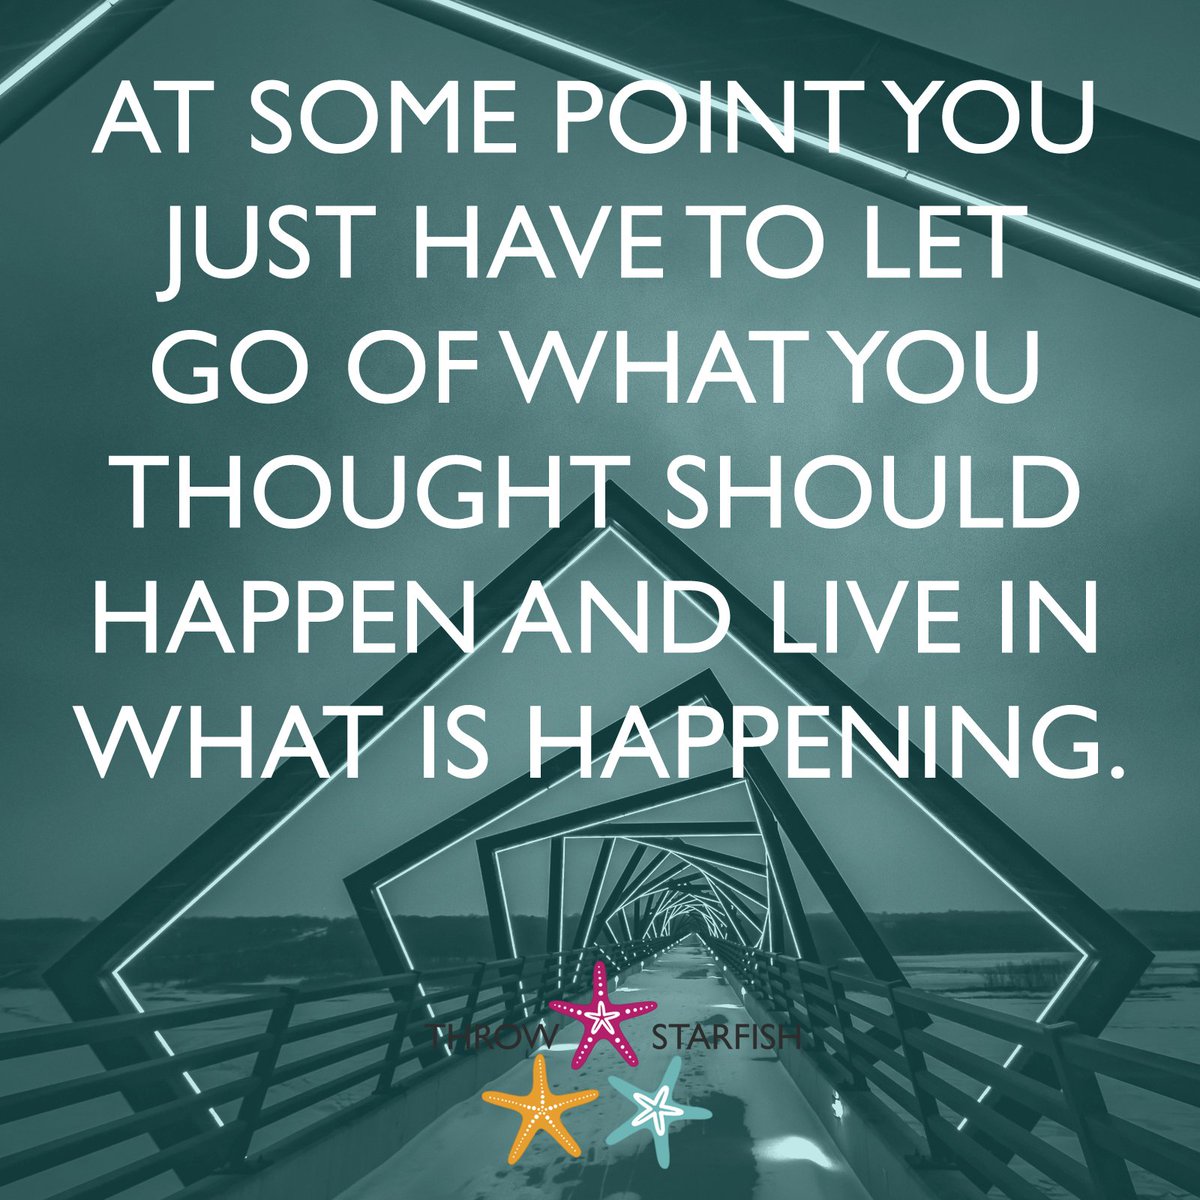 At some point you just have to let go of what you thought should happen and live what is happening.
You can #Listen to episodes of our #Podcast at throwstarfish.com #ThrowStarfish